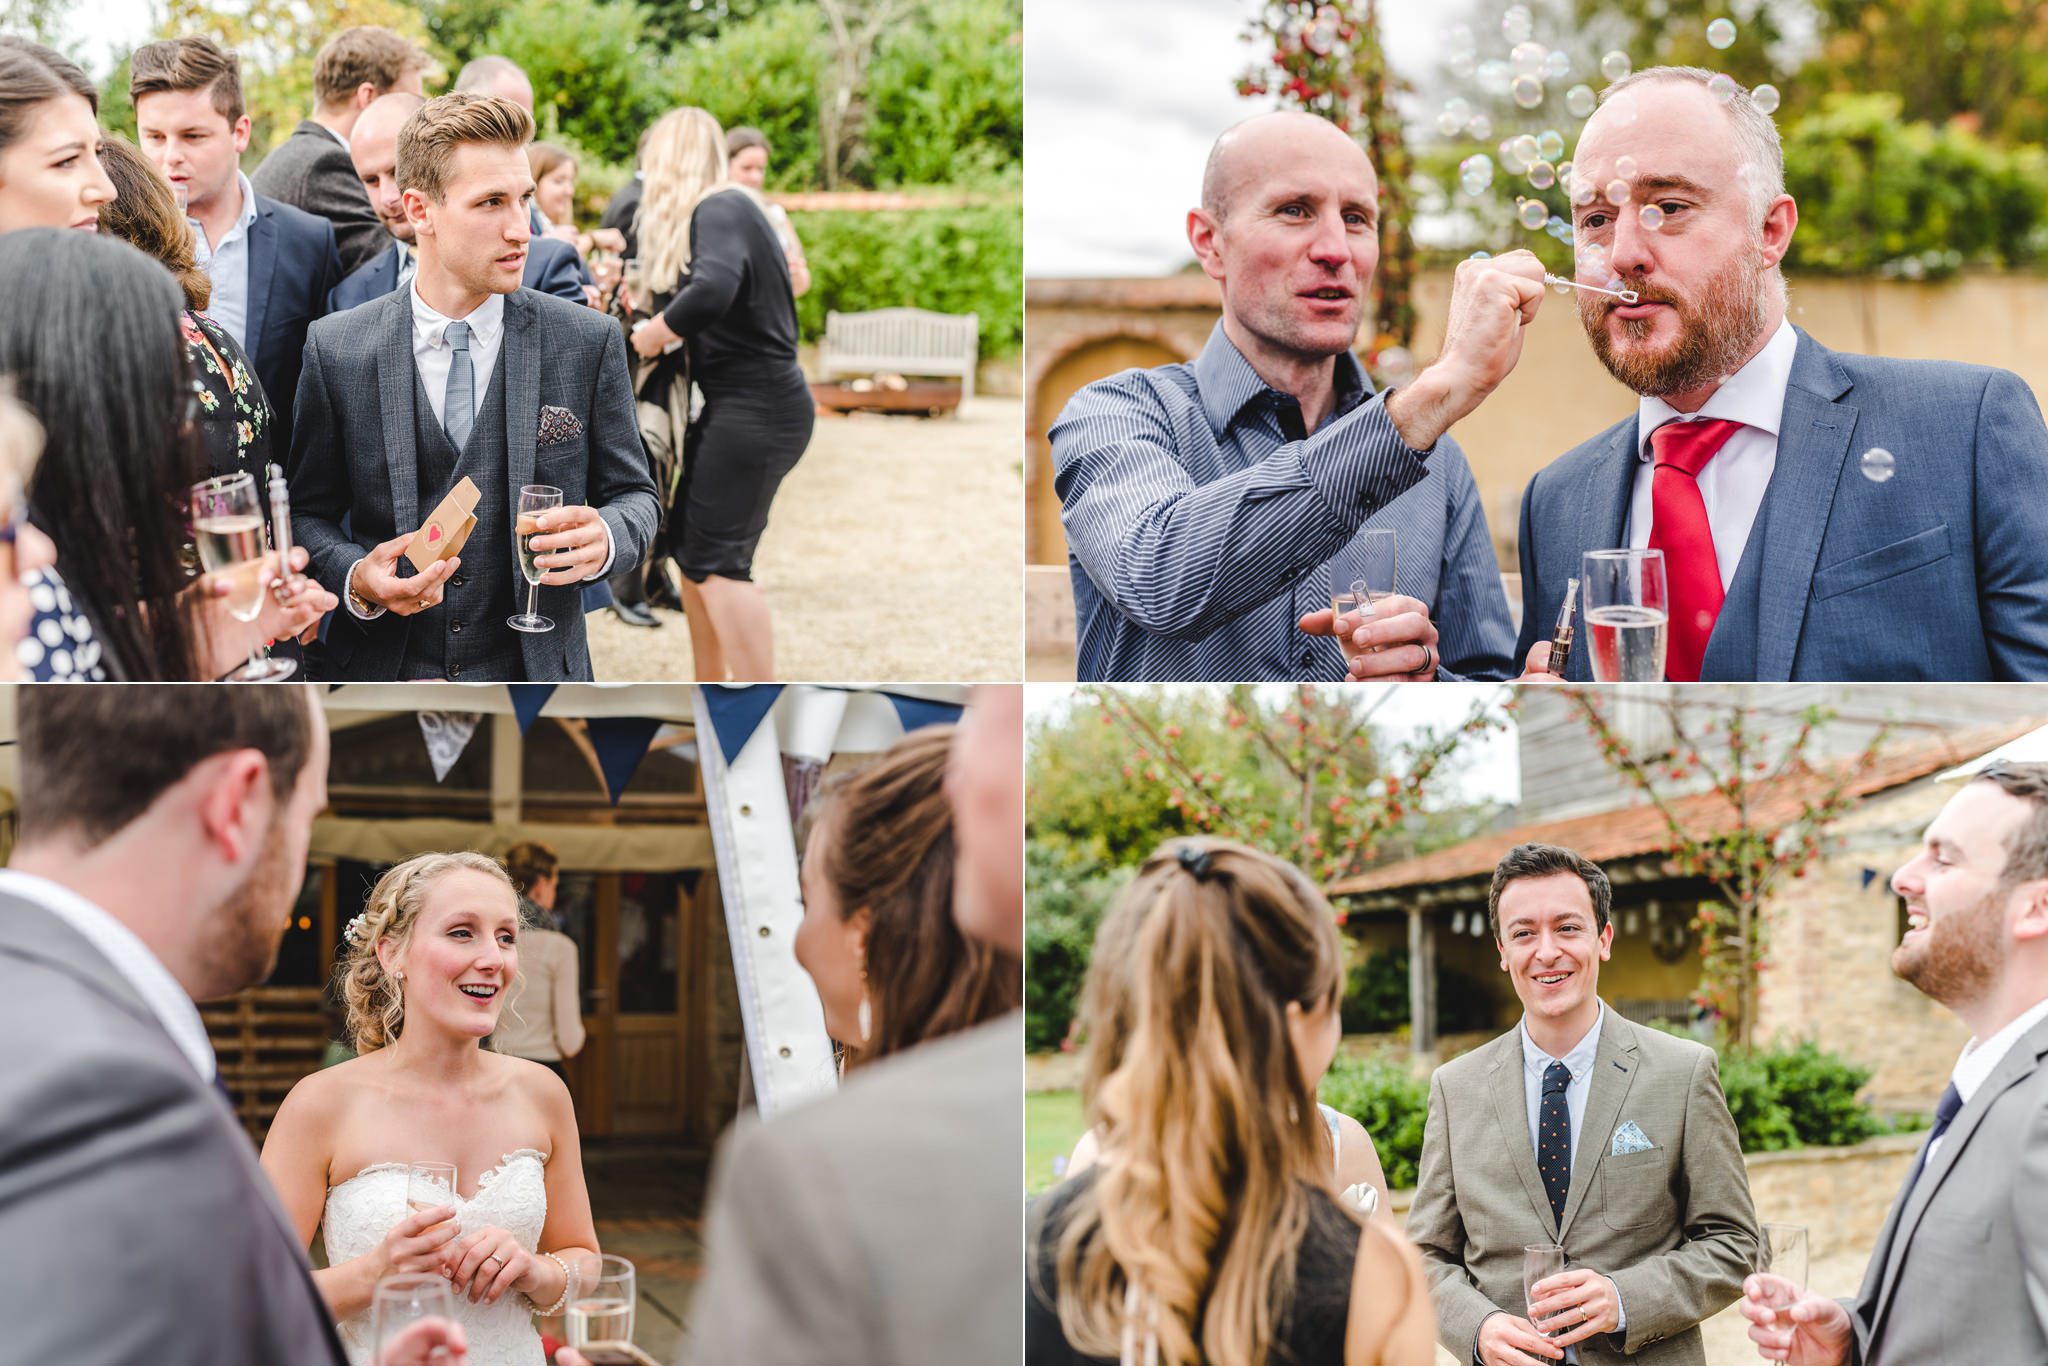 Candid wedding photography of guests at Oxleaze Barn by Bigeye Photography